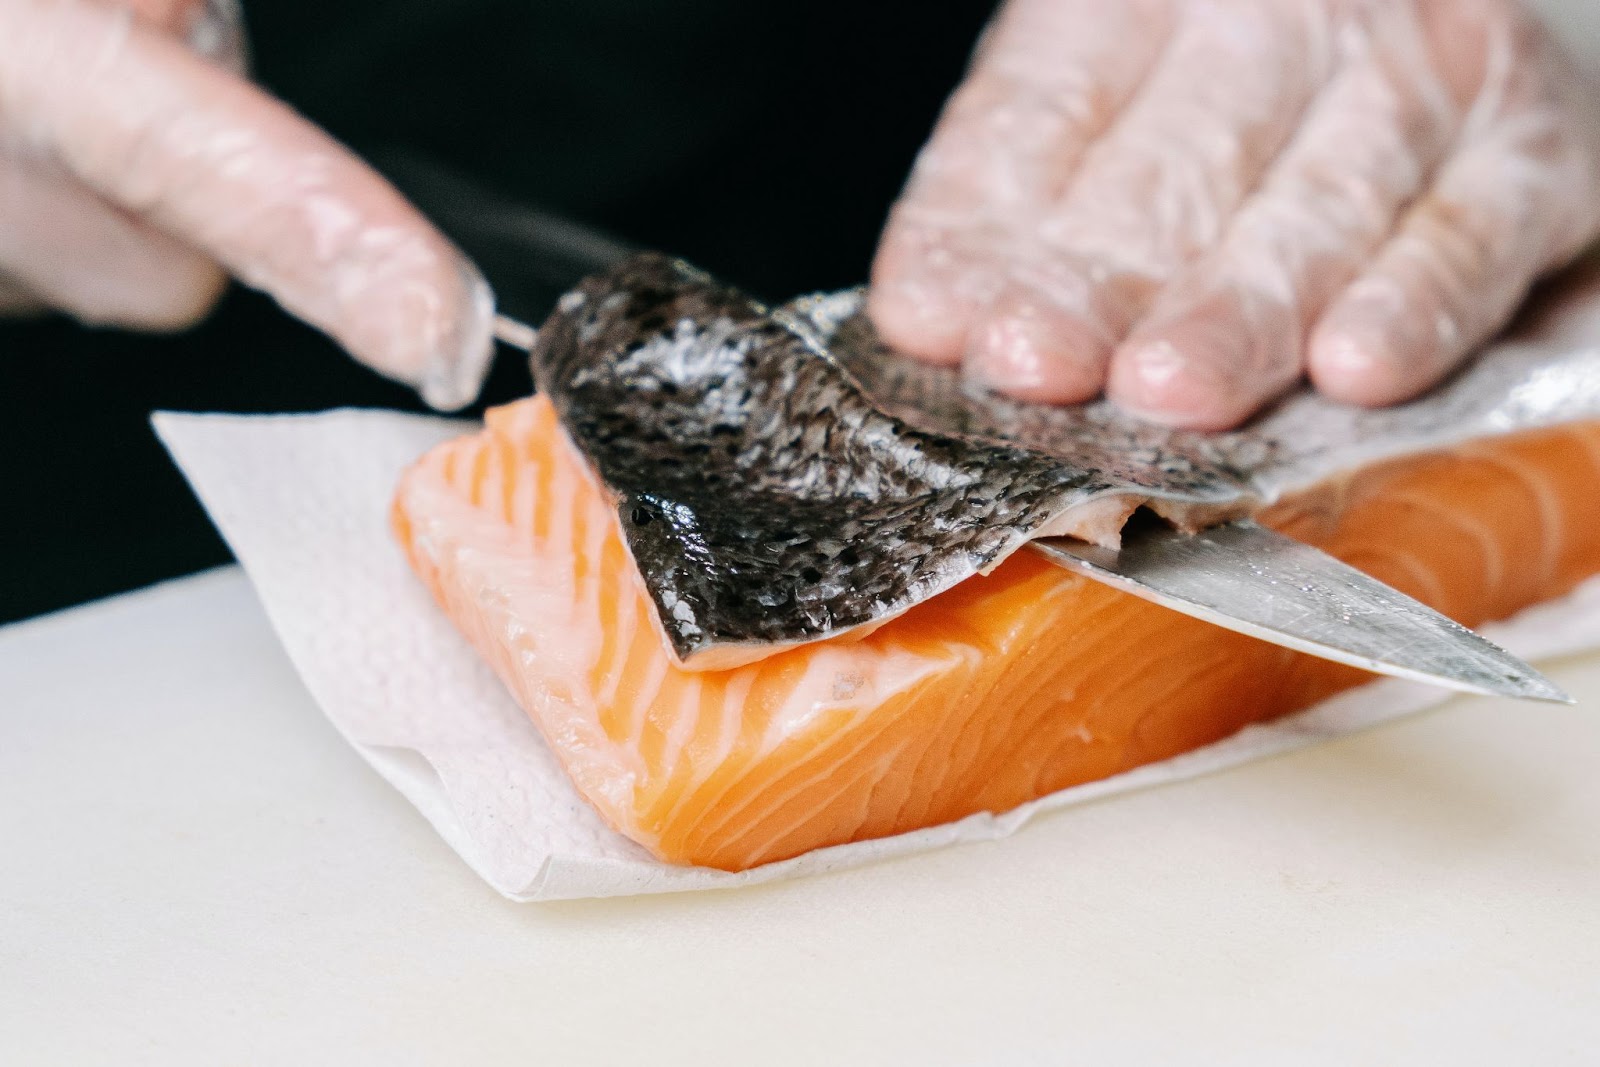 removing skin from salmon fillet